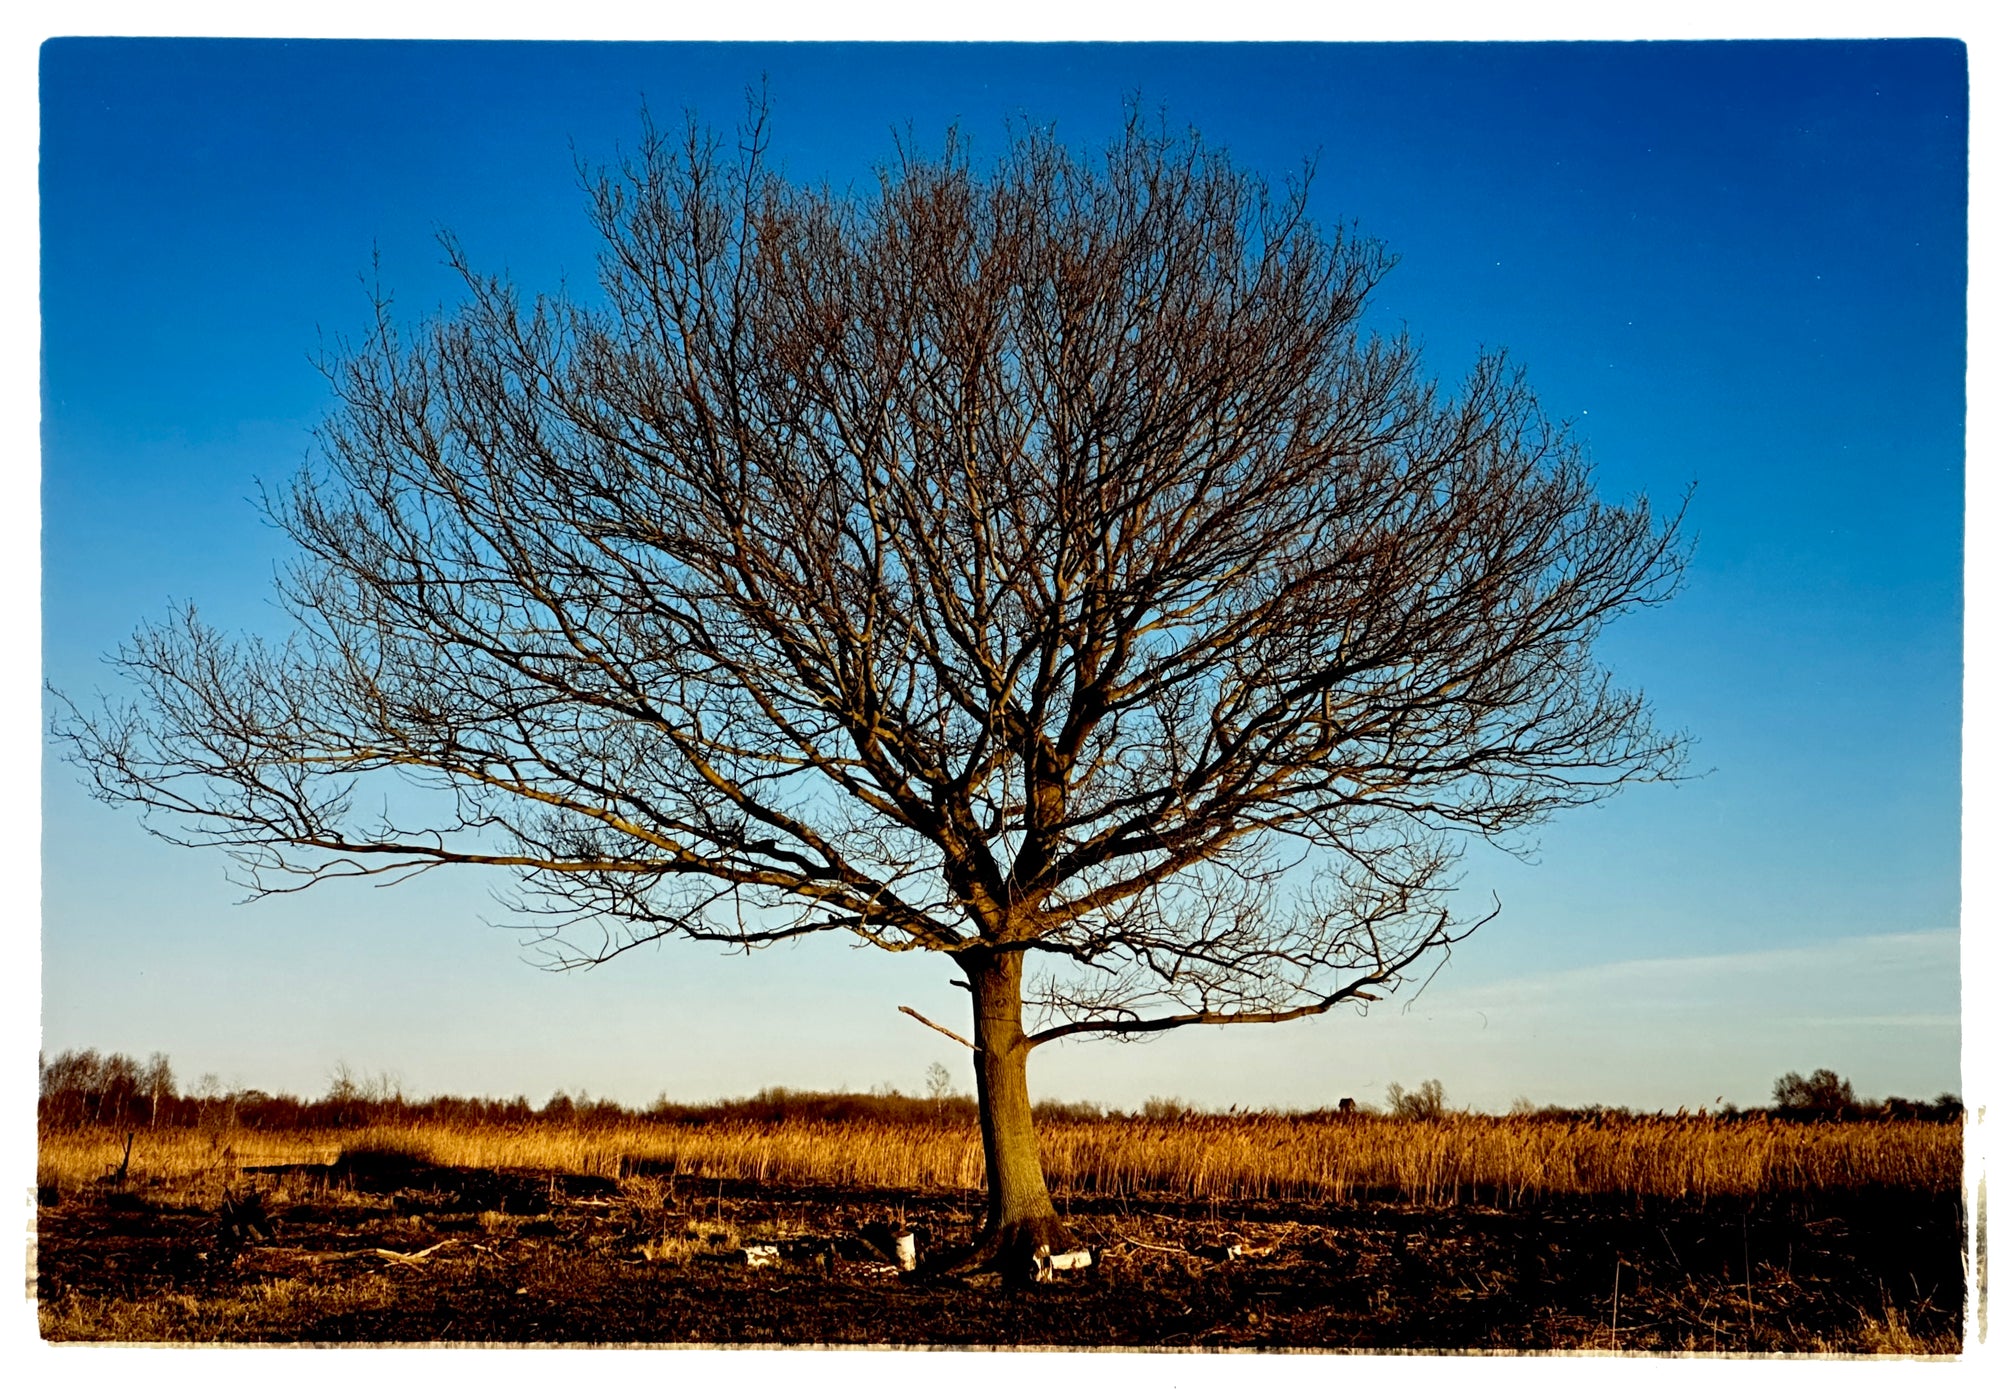 Photograph by Richard Heeps. A winter tree fills this photograph, with a vast blue sky behind and golden fenland below.